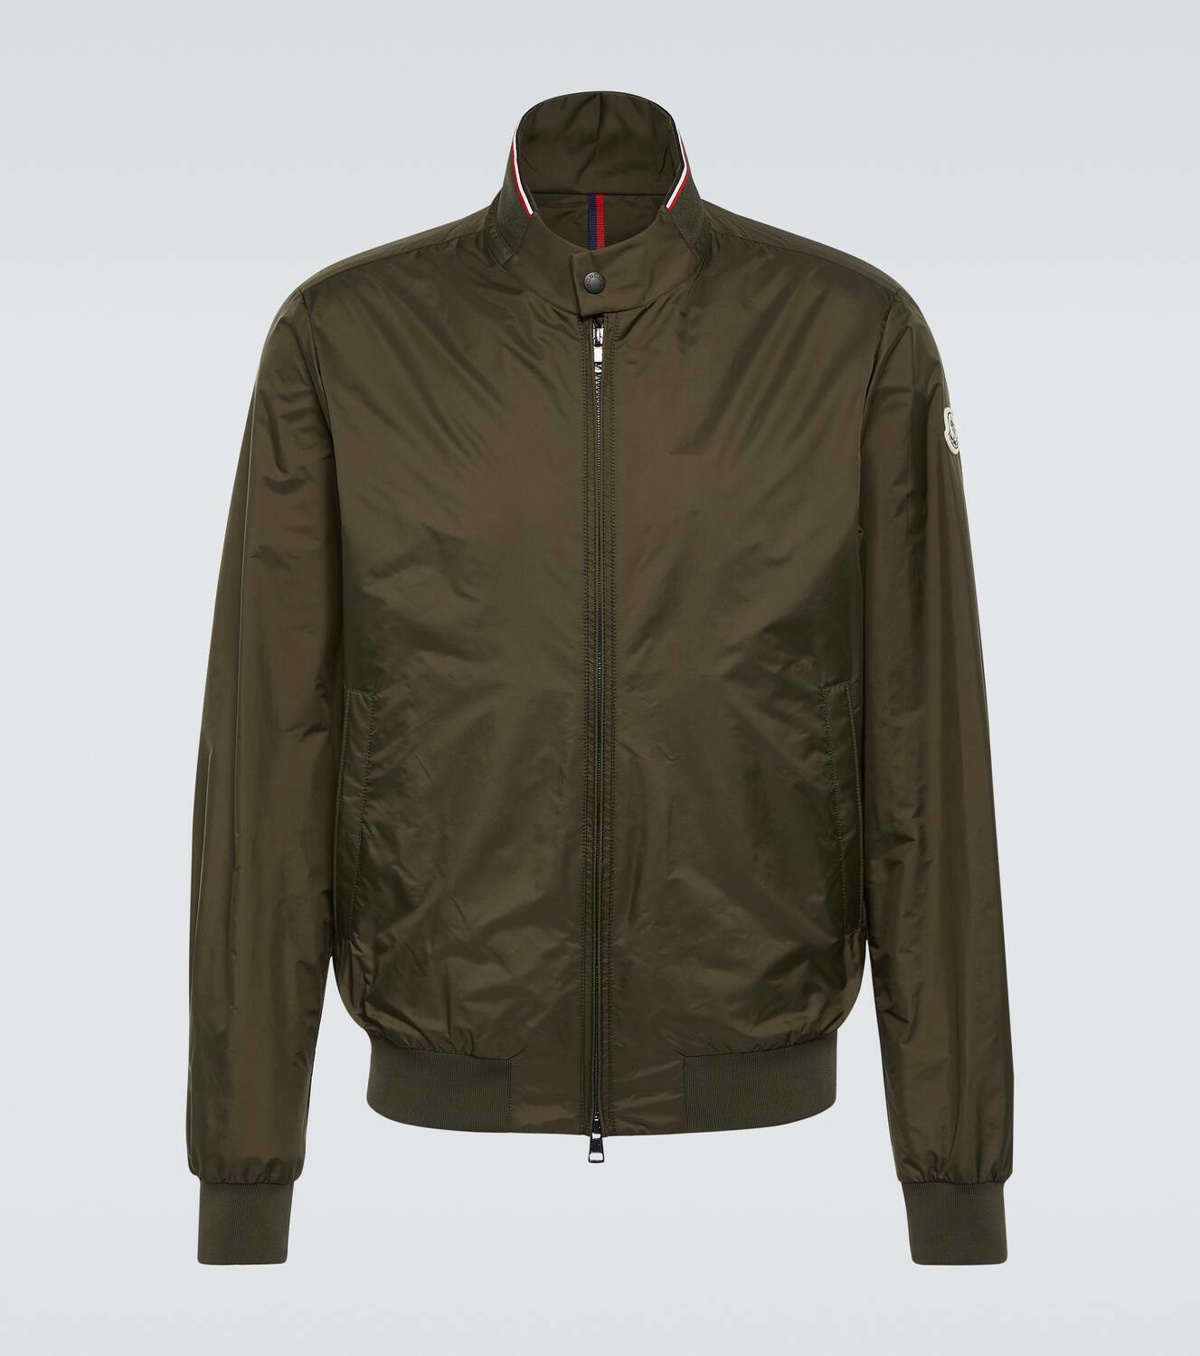 Moncler Reppe technical jacket